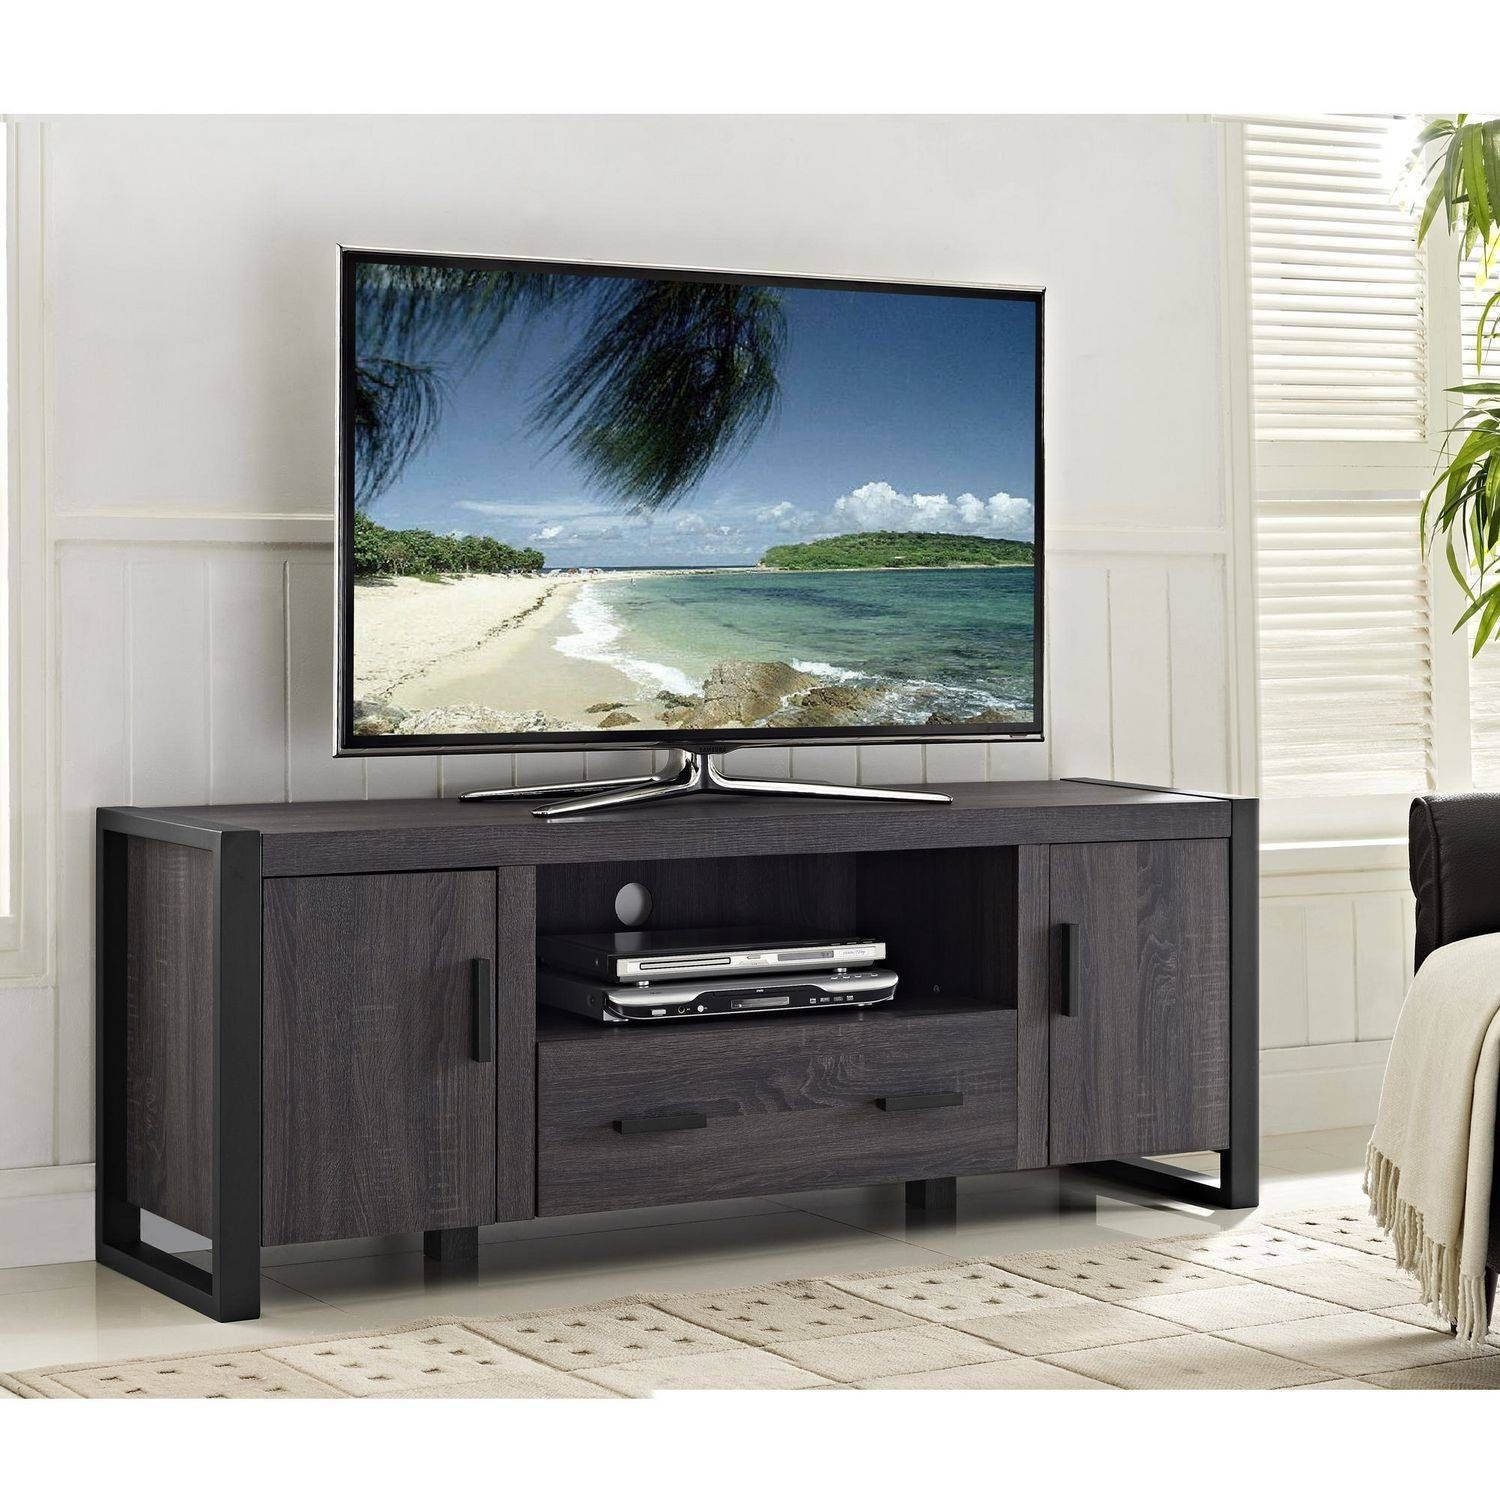 We Furniture 60" Grey Wood Tv Stand Console | Walmart Canada Intended For Grey Wood Tv Stands (Photo 1 of 15)